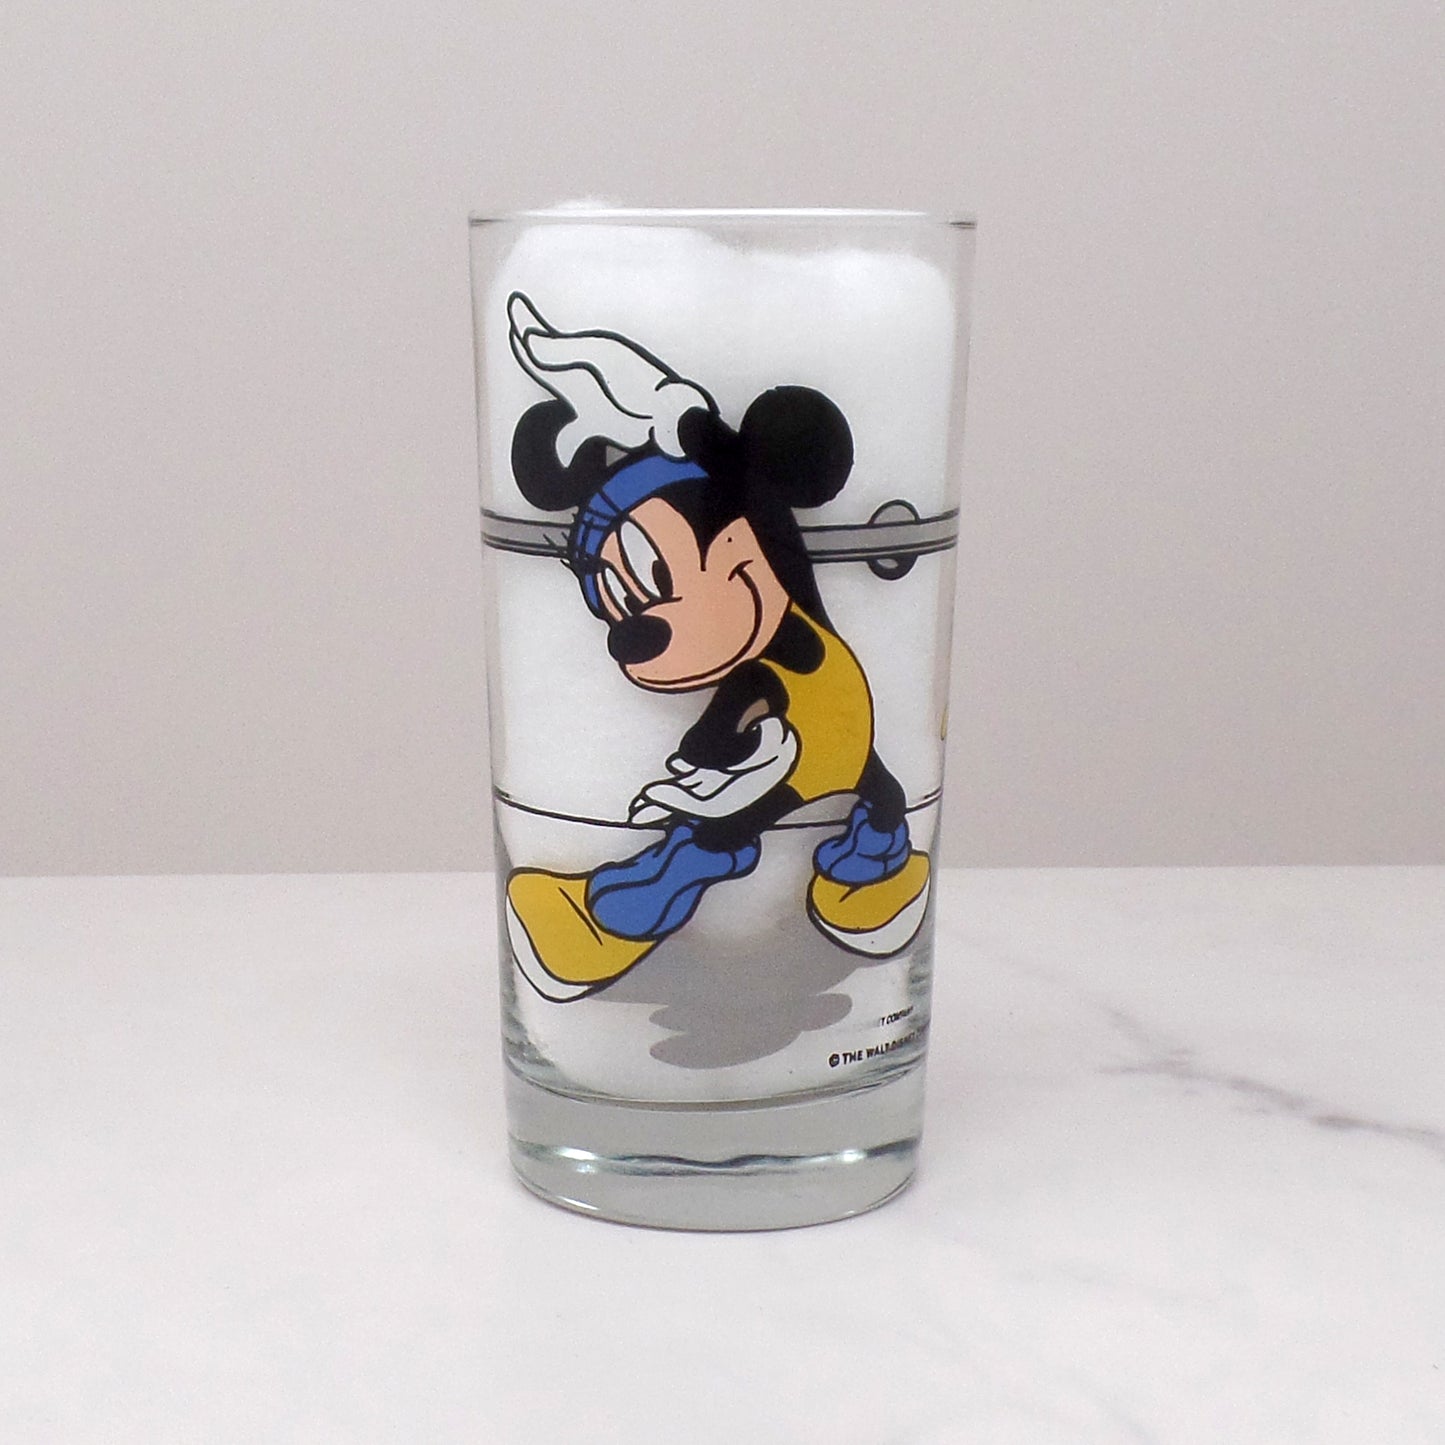 Vintage Minnie Mouse Aerobics 12 oz Glasses by Anchor Hocking - Set of 3 (1980s)